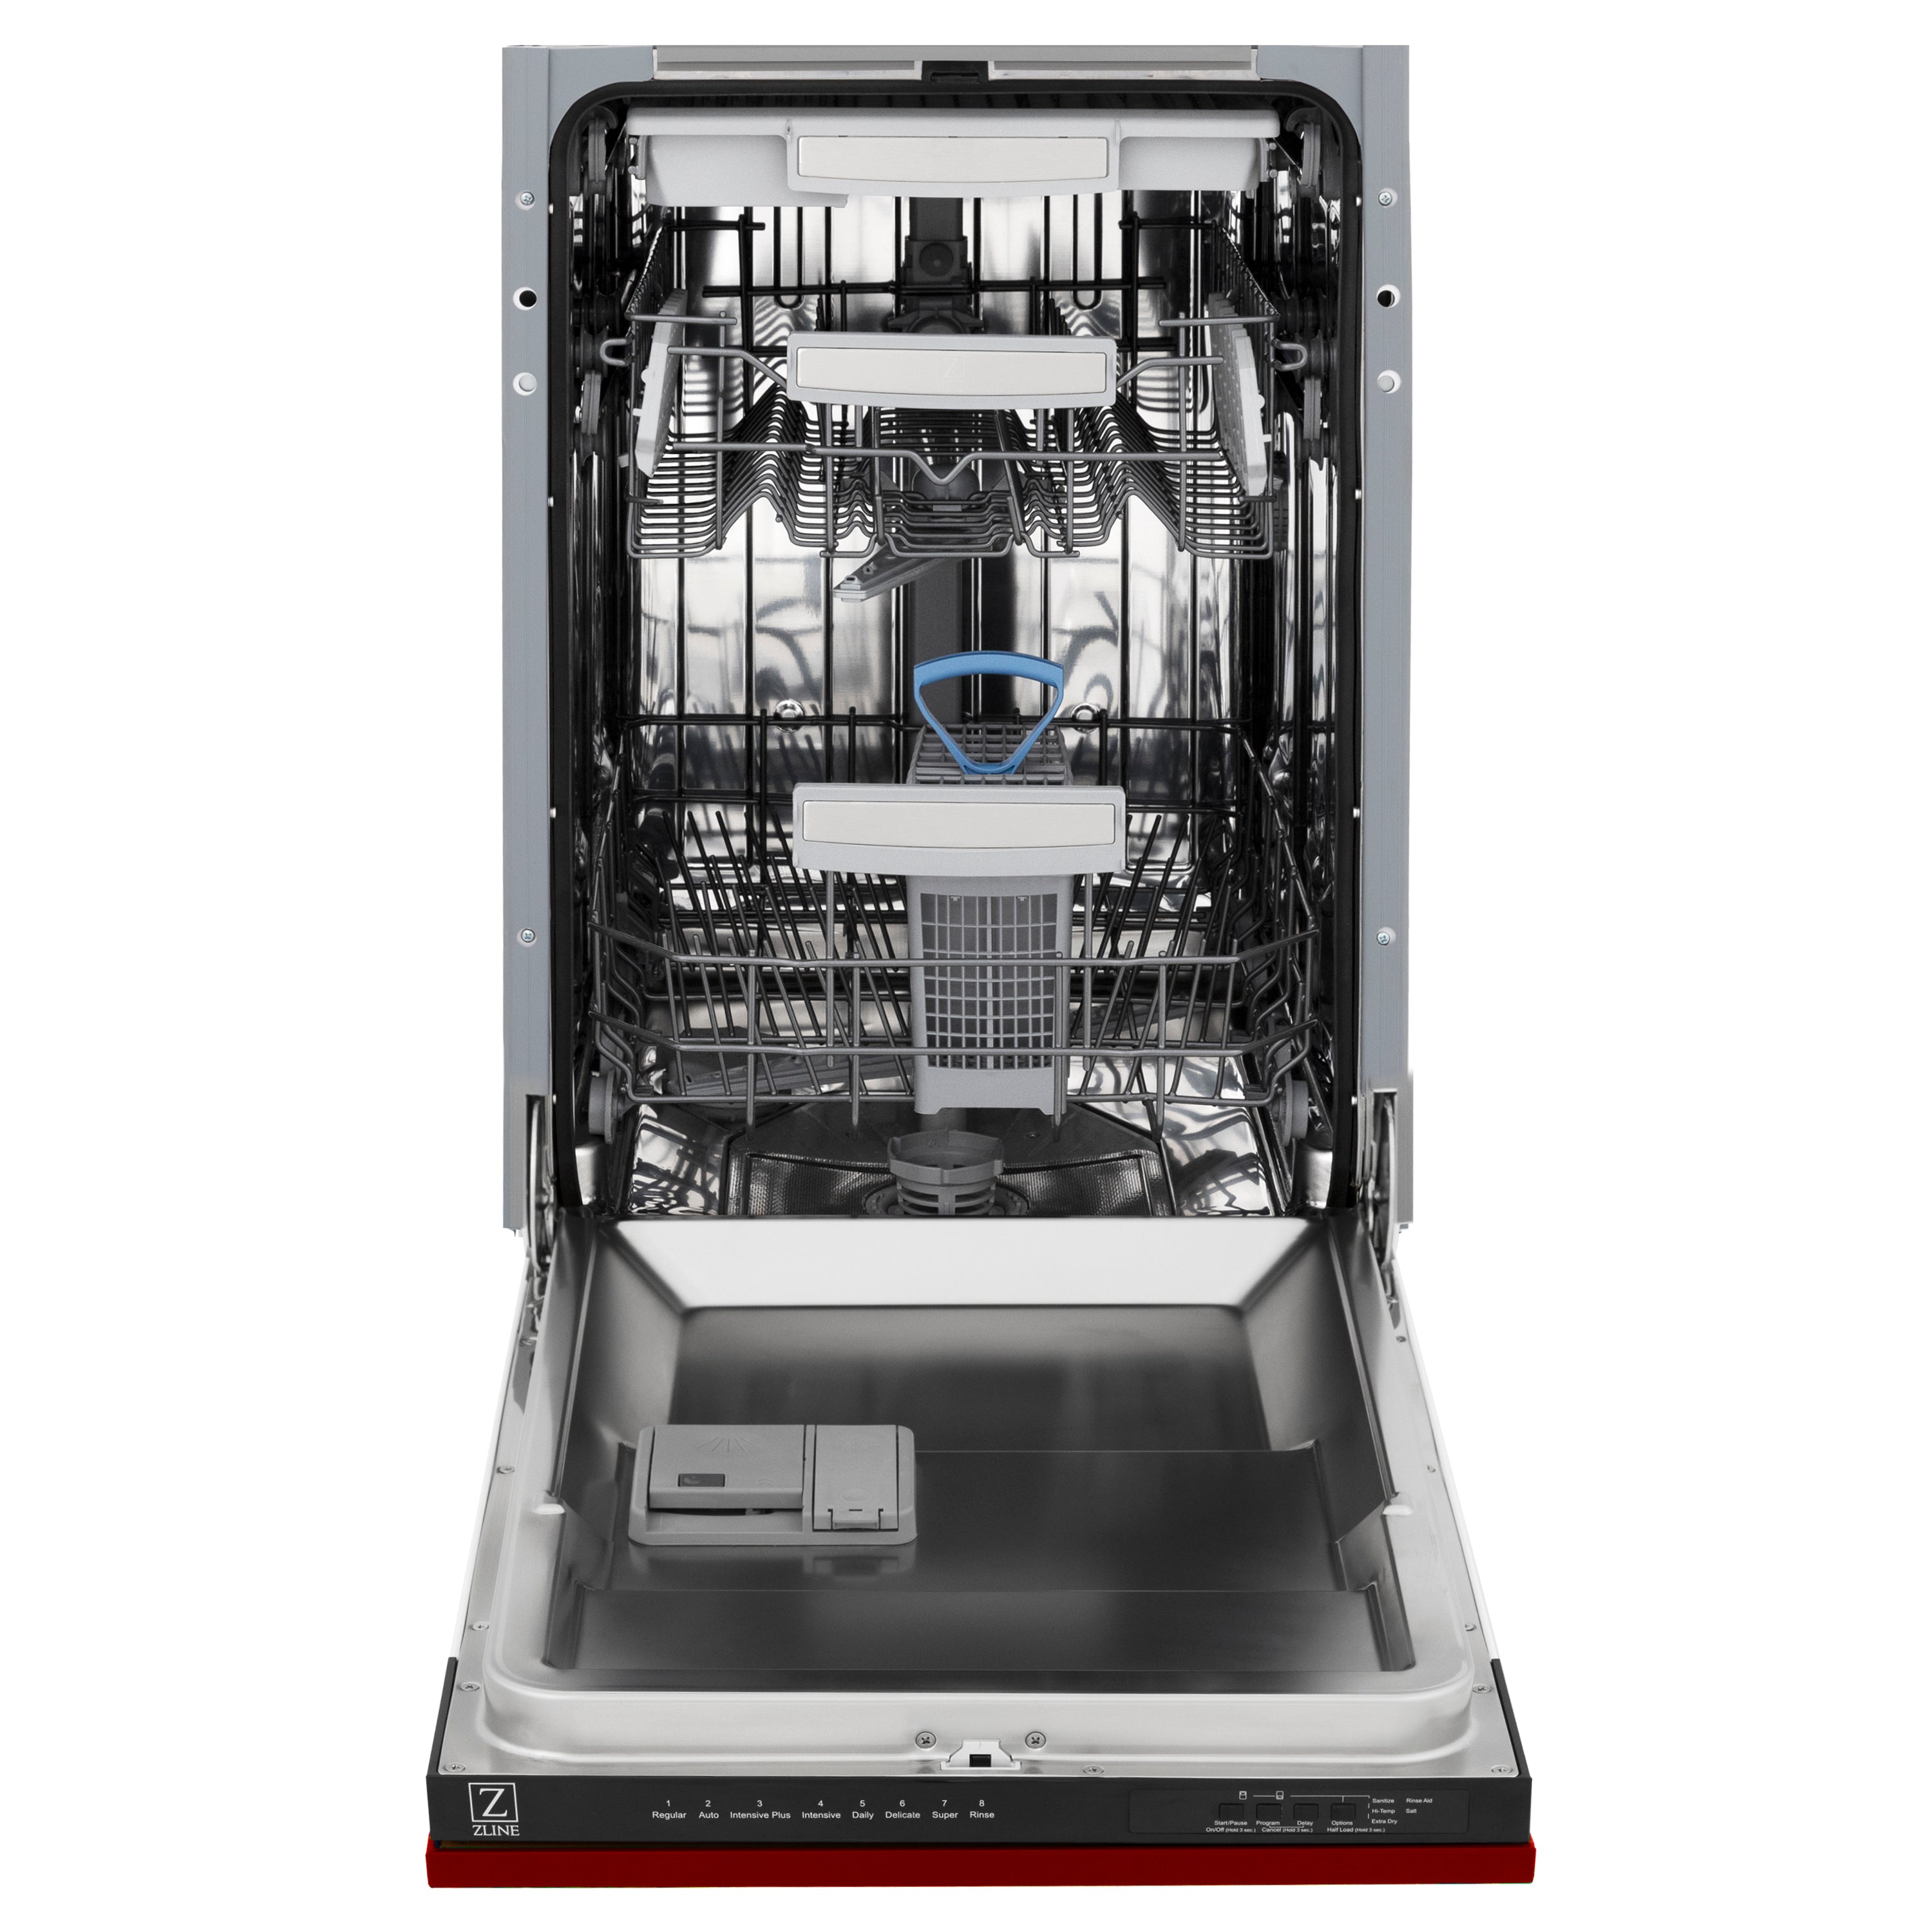 ZLINE 18" Tallac Series 3rd Rack Top Control Built-In Dishwasher in Red Gloss with Stainless Steel Tub, 51dBa (DWV-RG-18)